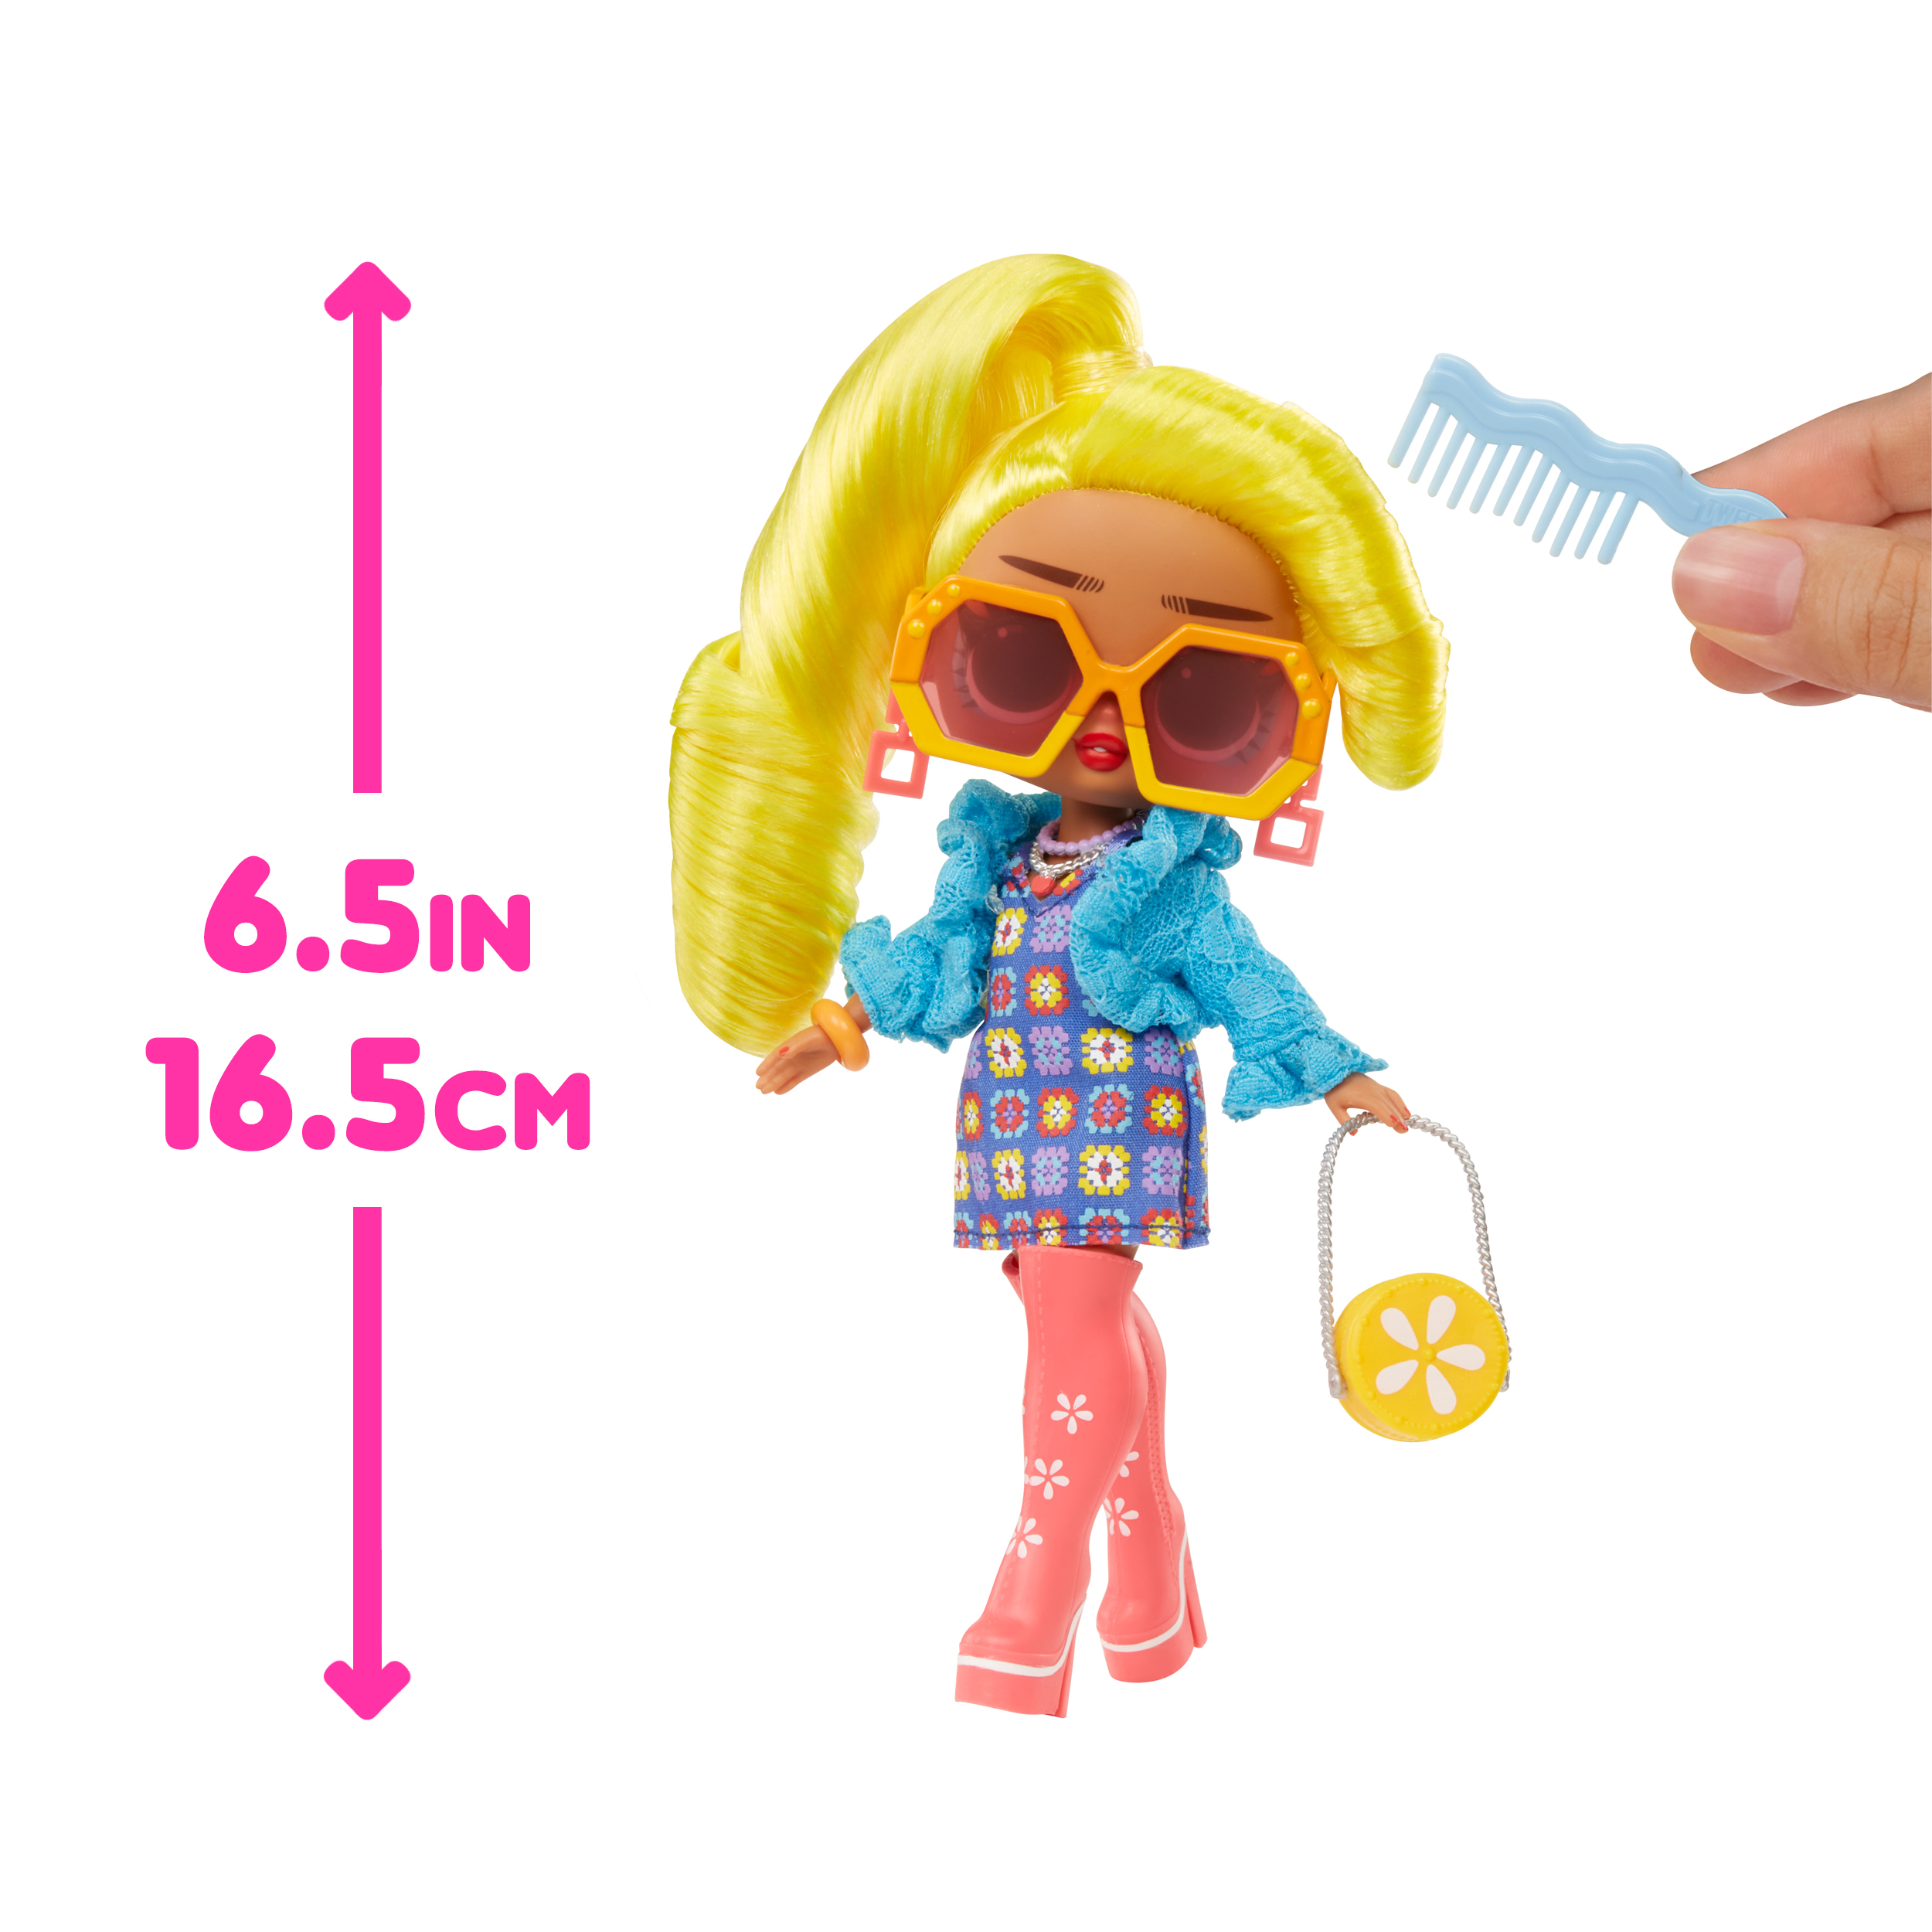 LOL Surprise Tweens Fashion Doll Hana Groove with 10+ Surprises, Great Gift for Kids Ages 4+ - image 4 of 7